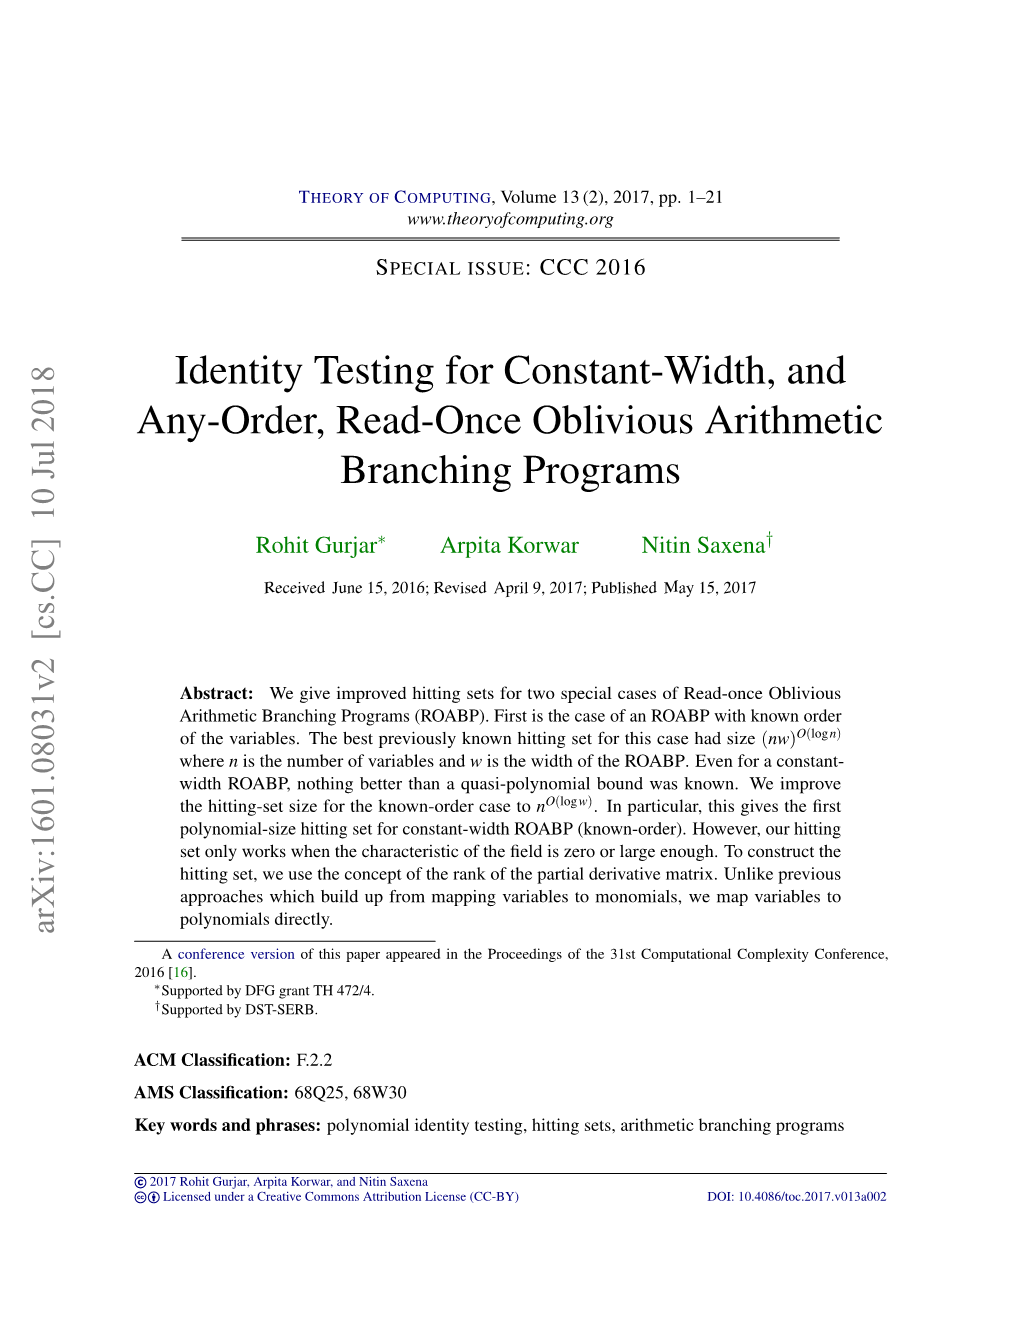 Identity Testing for Constant-Width, and Any-Order, Read-Once Oblivious Arithmetic Branching Programs